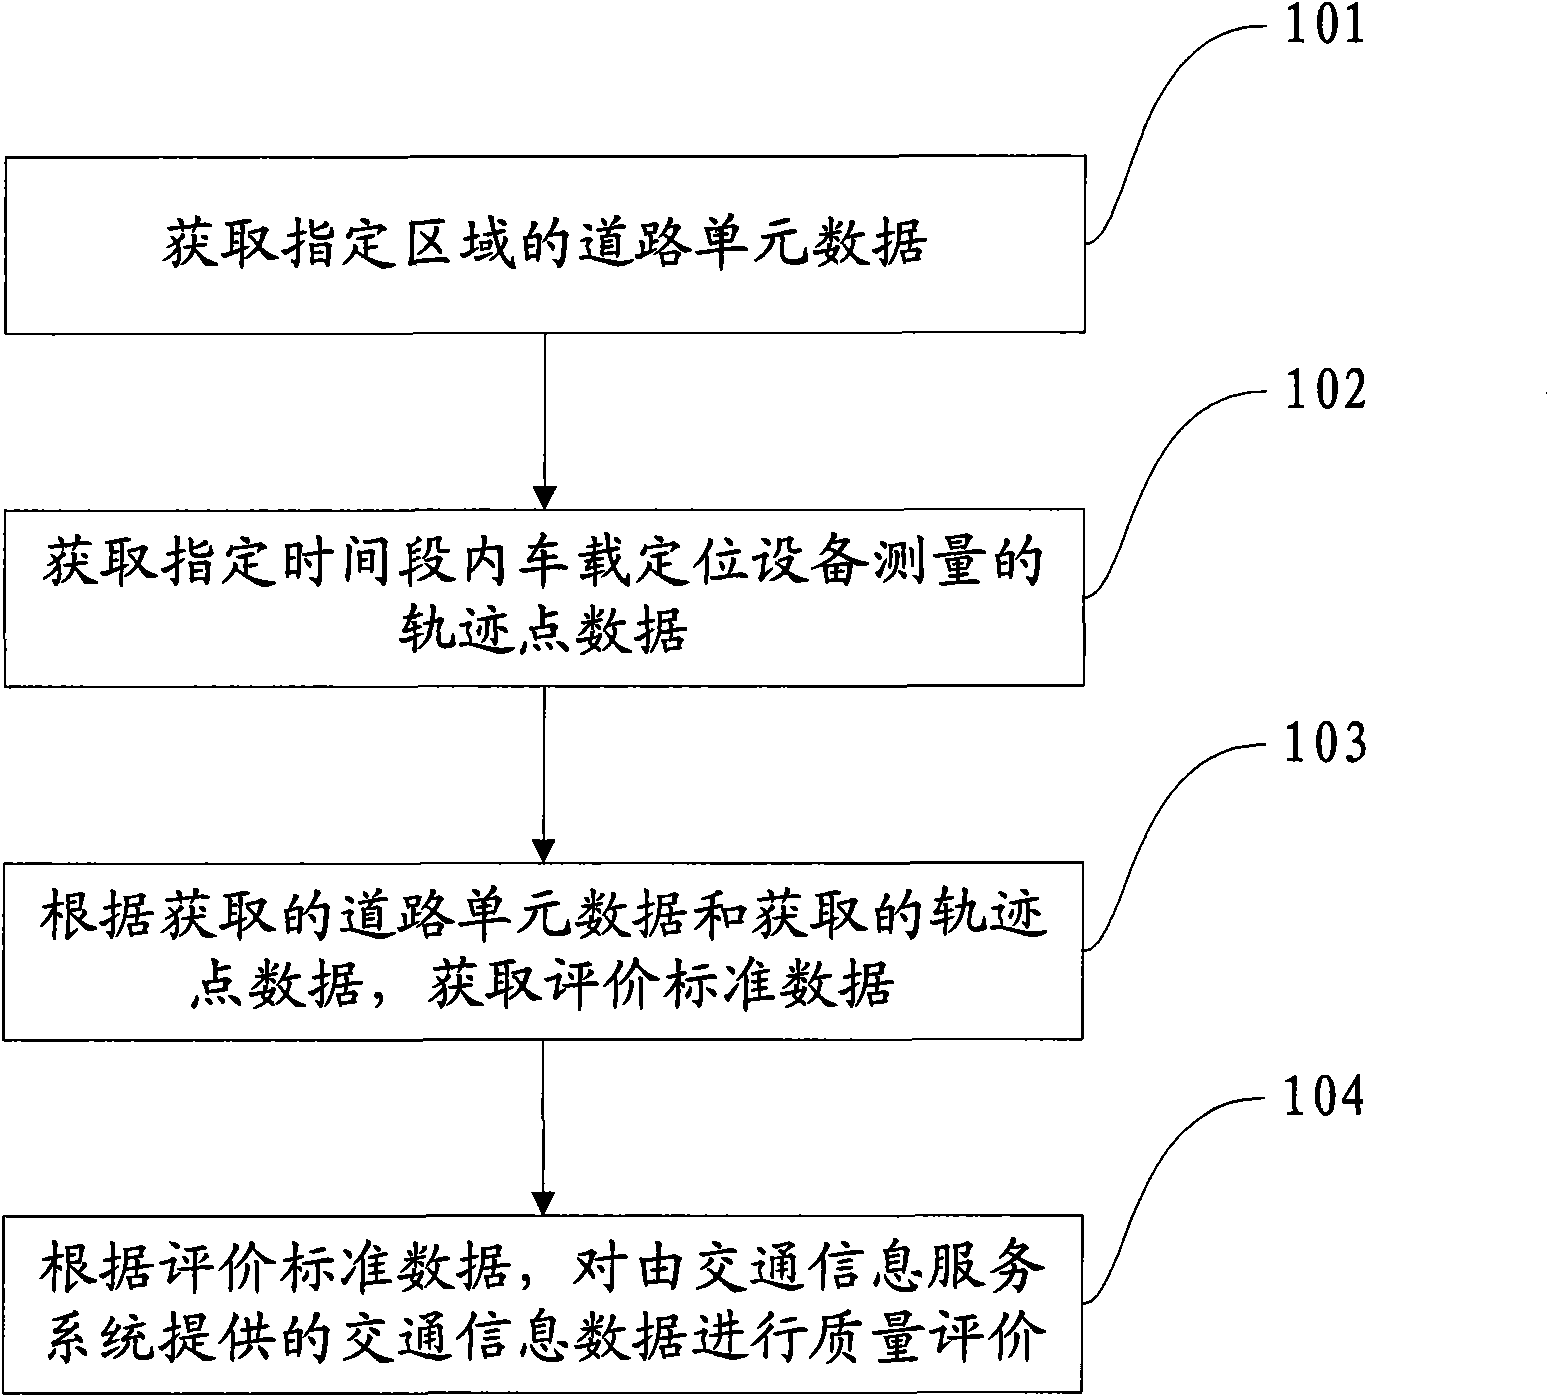 Traffic information quality evaluation method, device and system therefor